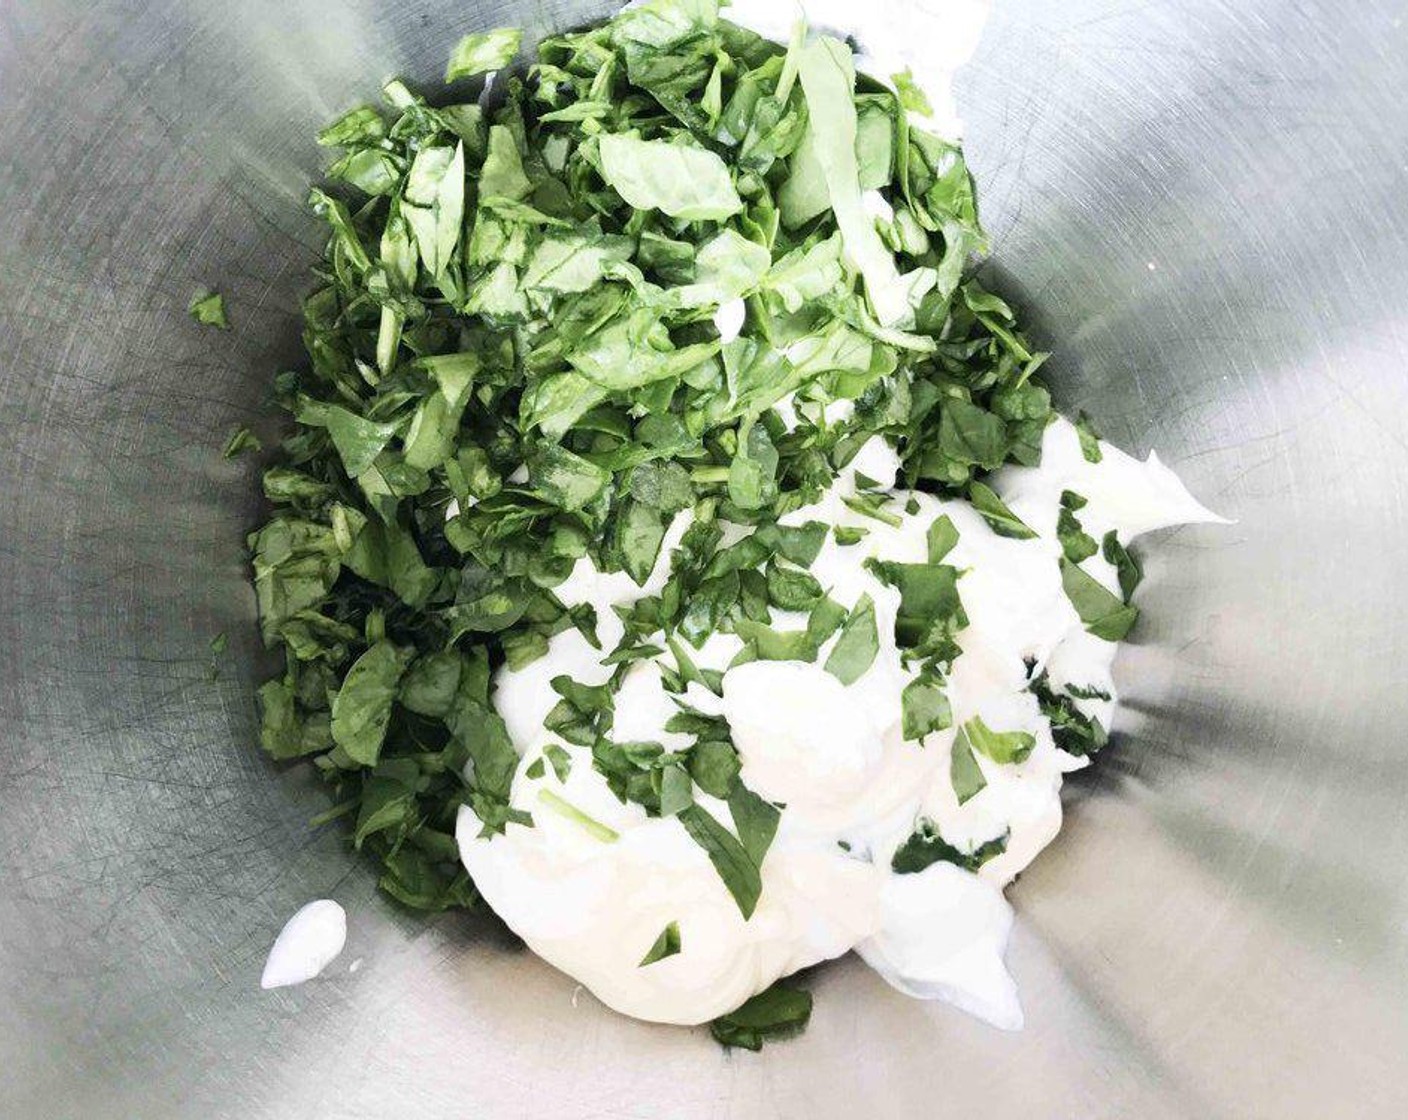 step 1 In a large bowl, mix together Fat-Free Greek Yogurt (1 2/3 cups), Frozen Spinach (2 cups), Light Mayonnaise (1 cup), Fresh Baby Spinach (5 2/3 cups), Onion Powder (1/2 tsp), Garlic Powder (1/2 tsp), Celery Salt (1/2 tsp), Salt (to taste) and Ground Black Pepper (to taste).